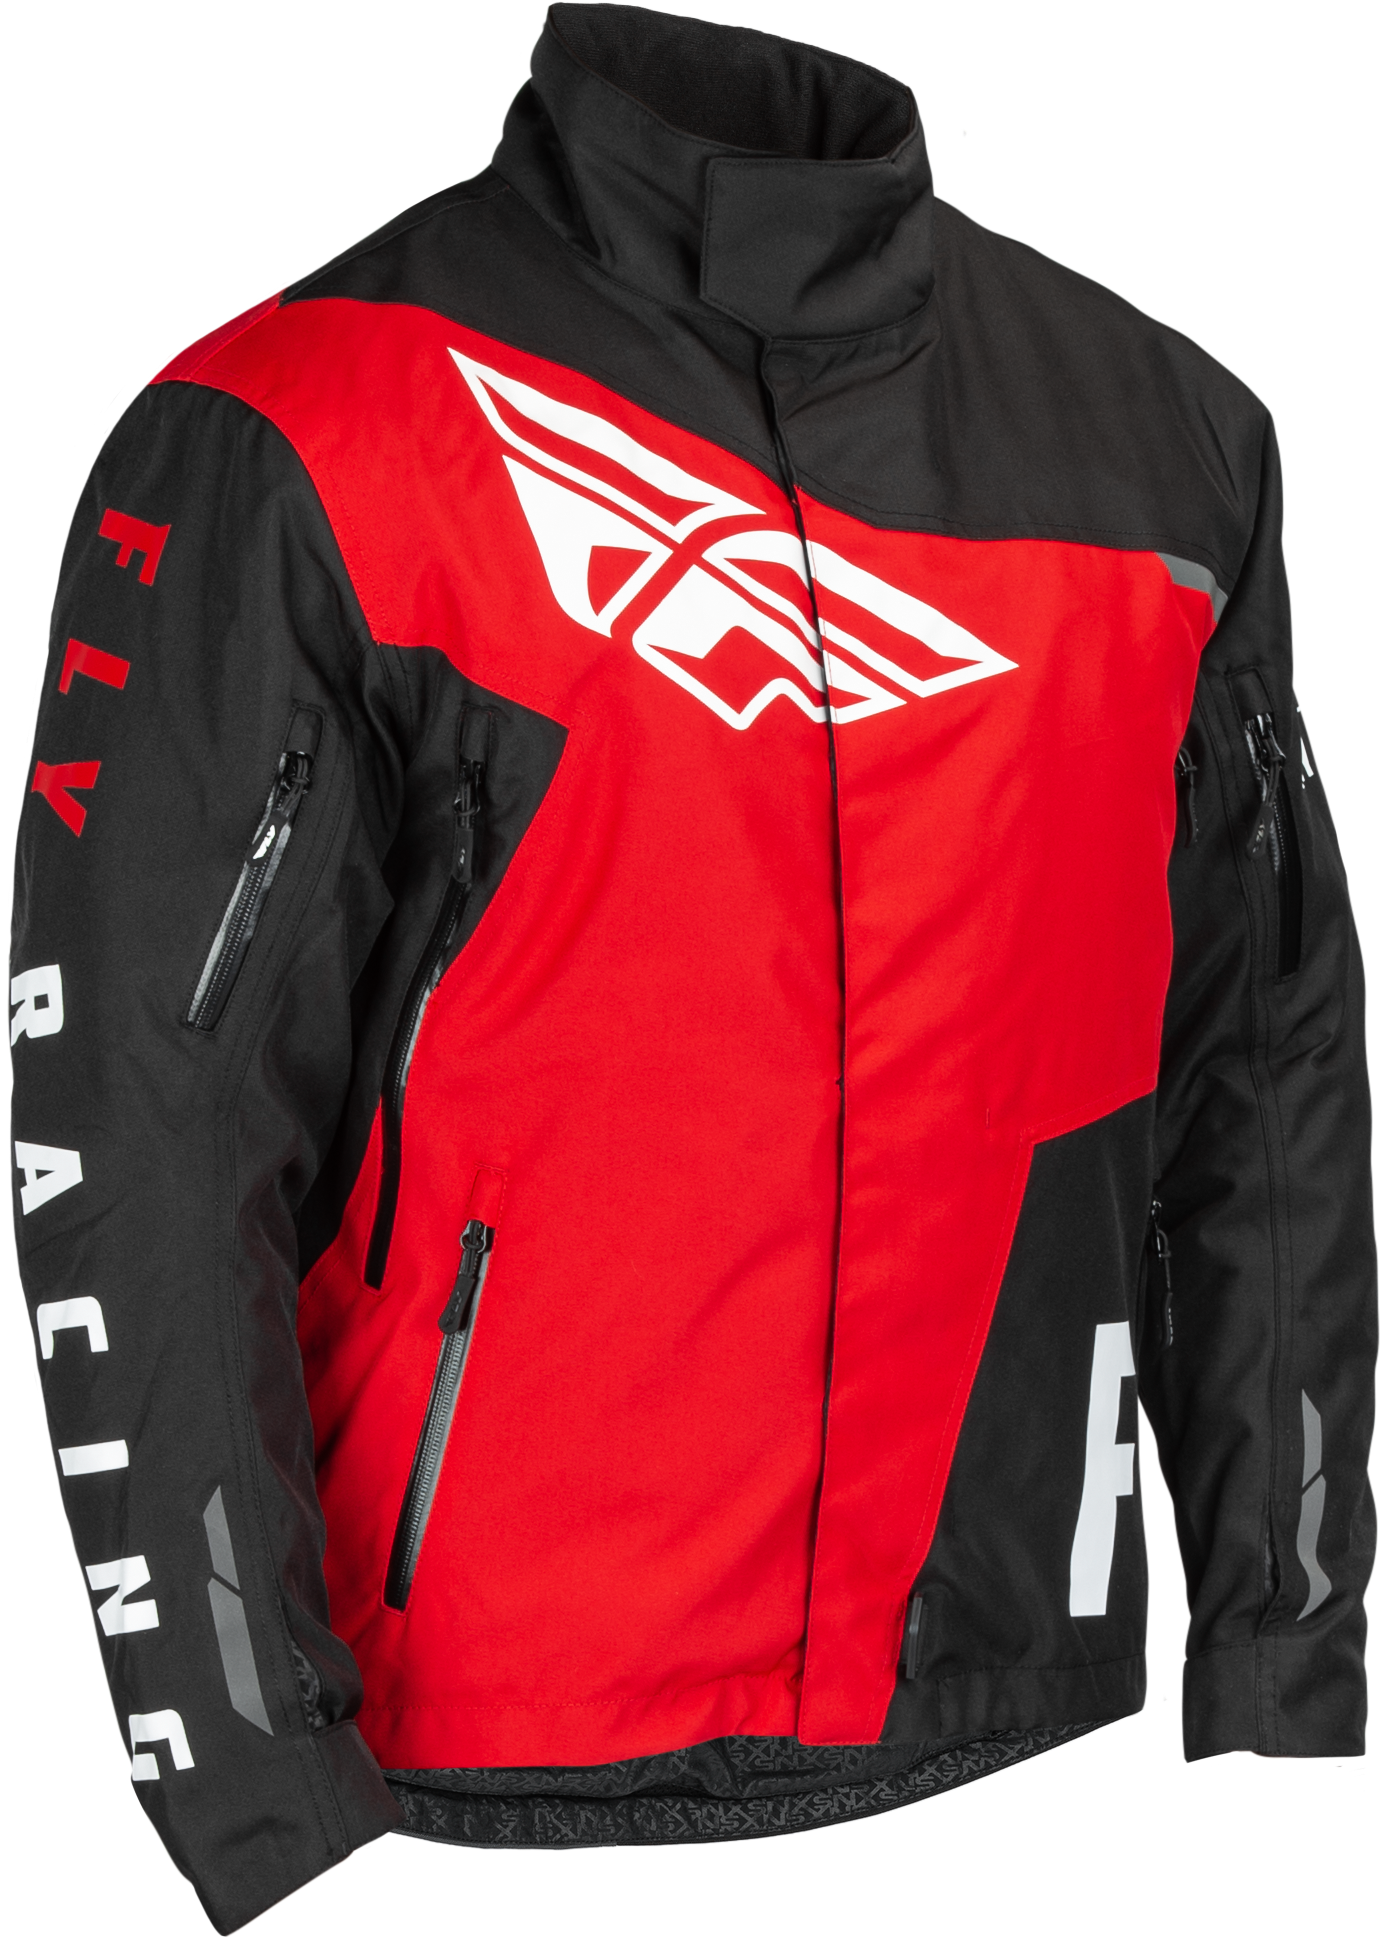 FLY RACING Youth Snx Pro Jacket Black/Red Ys 470-5402YS